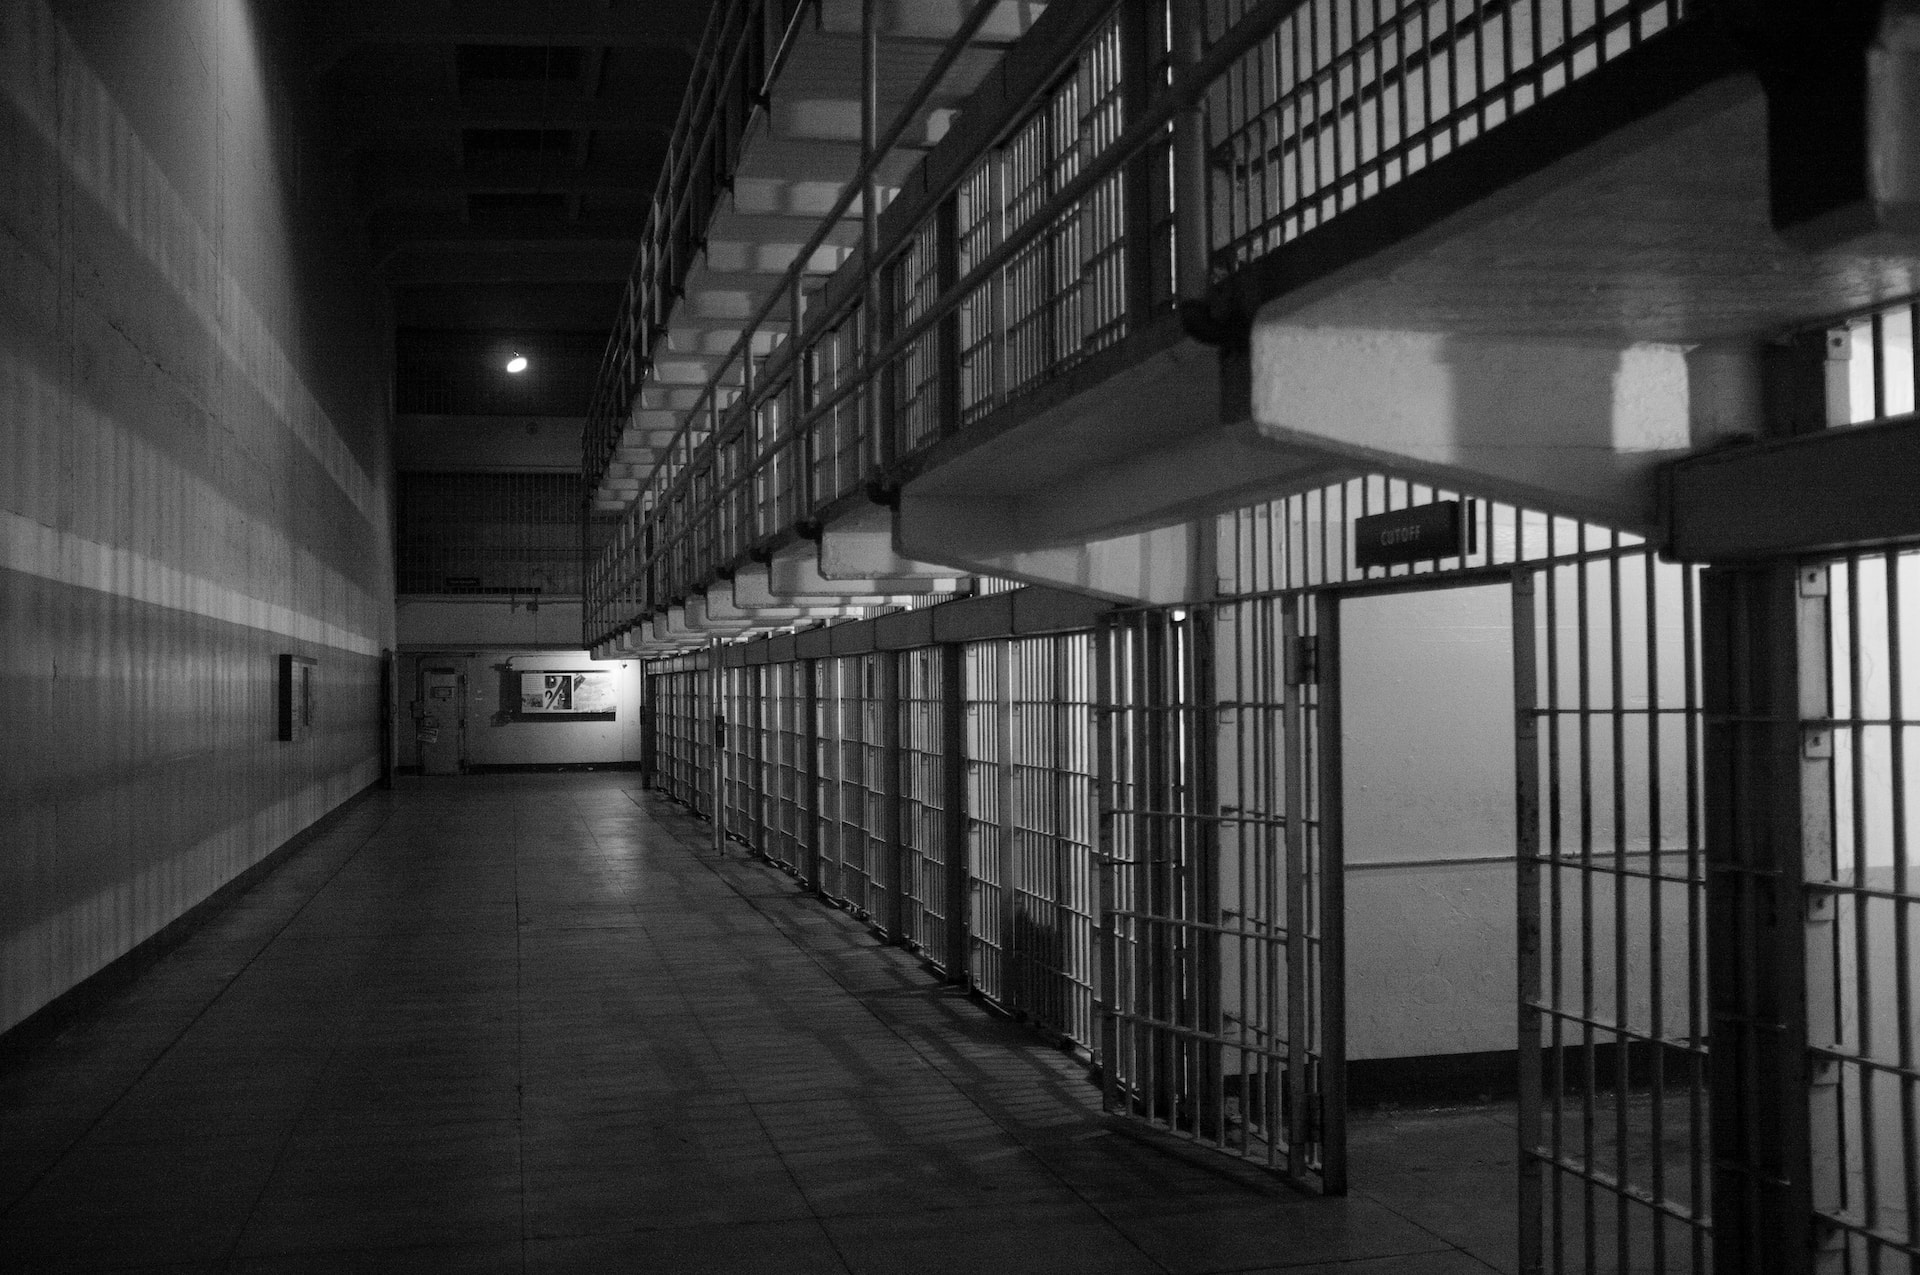 bars and jail cells - sexual offences in arizona